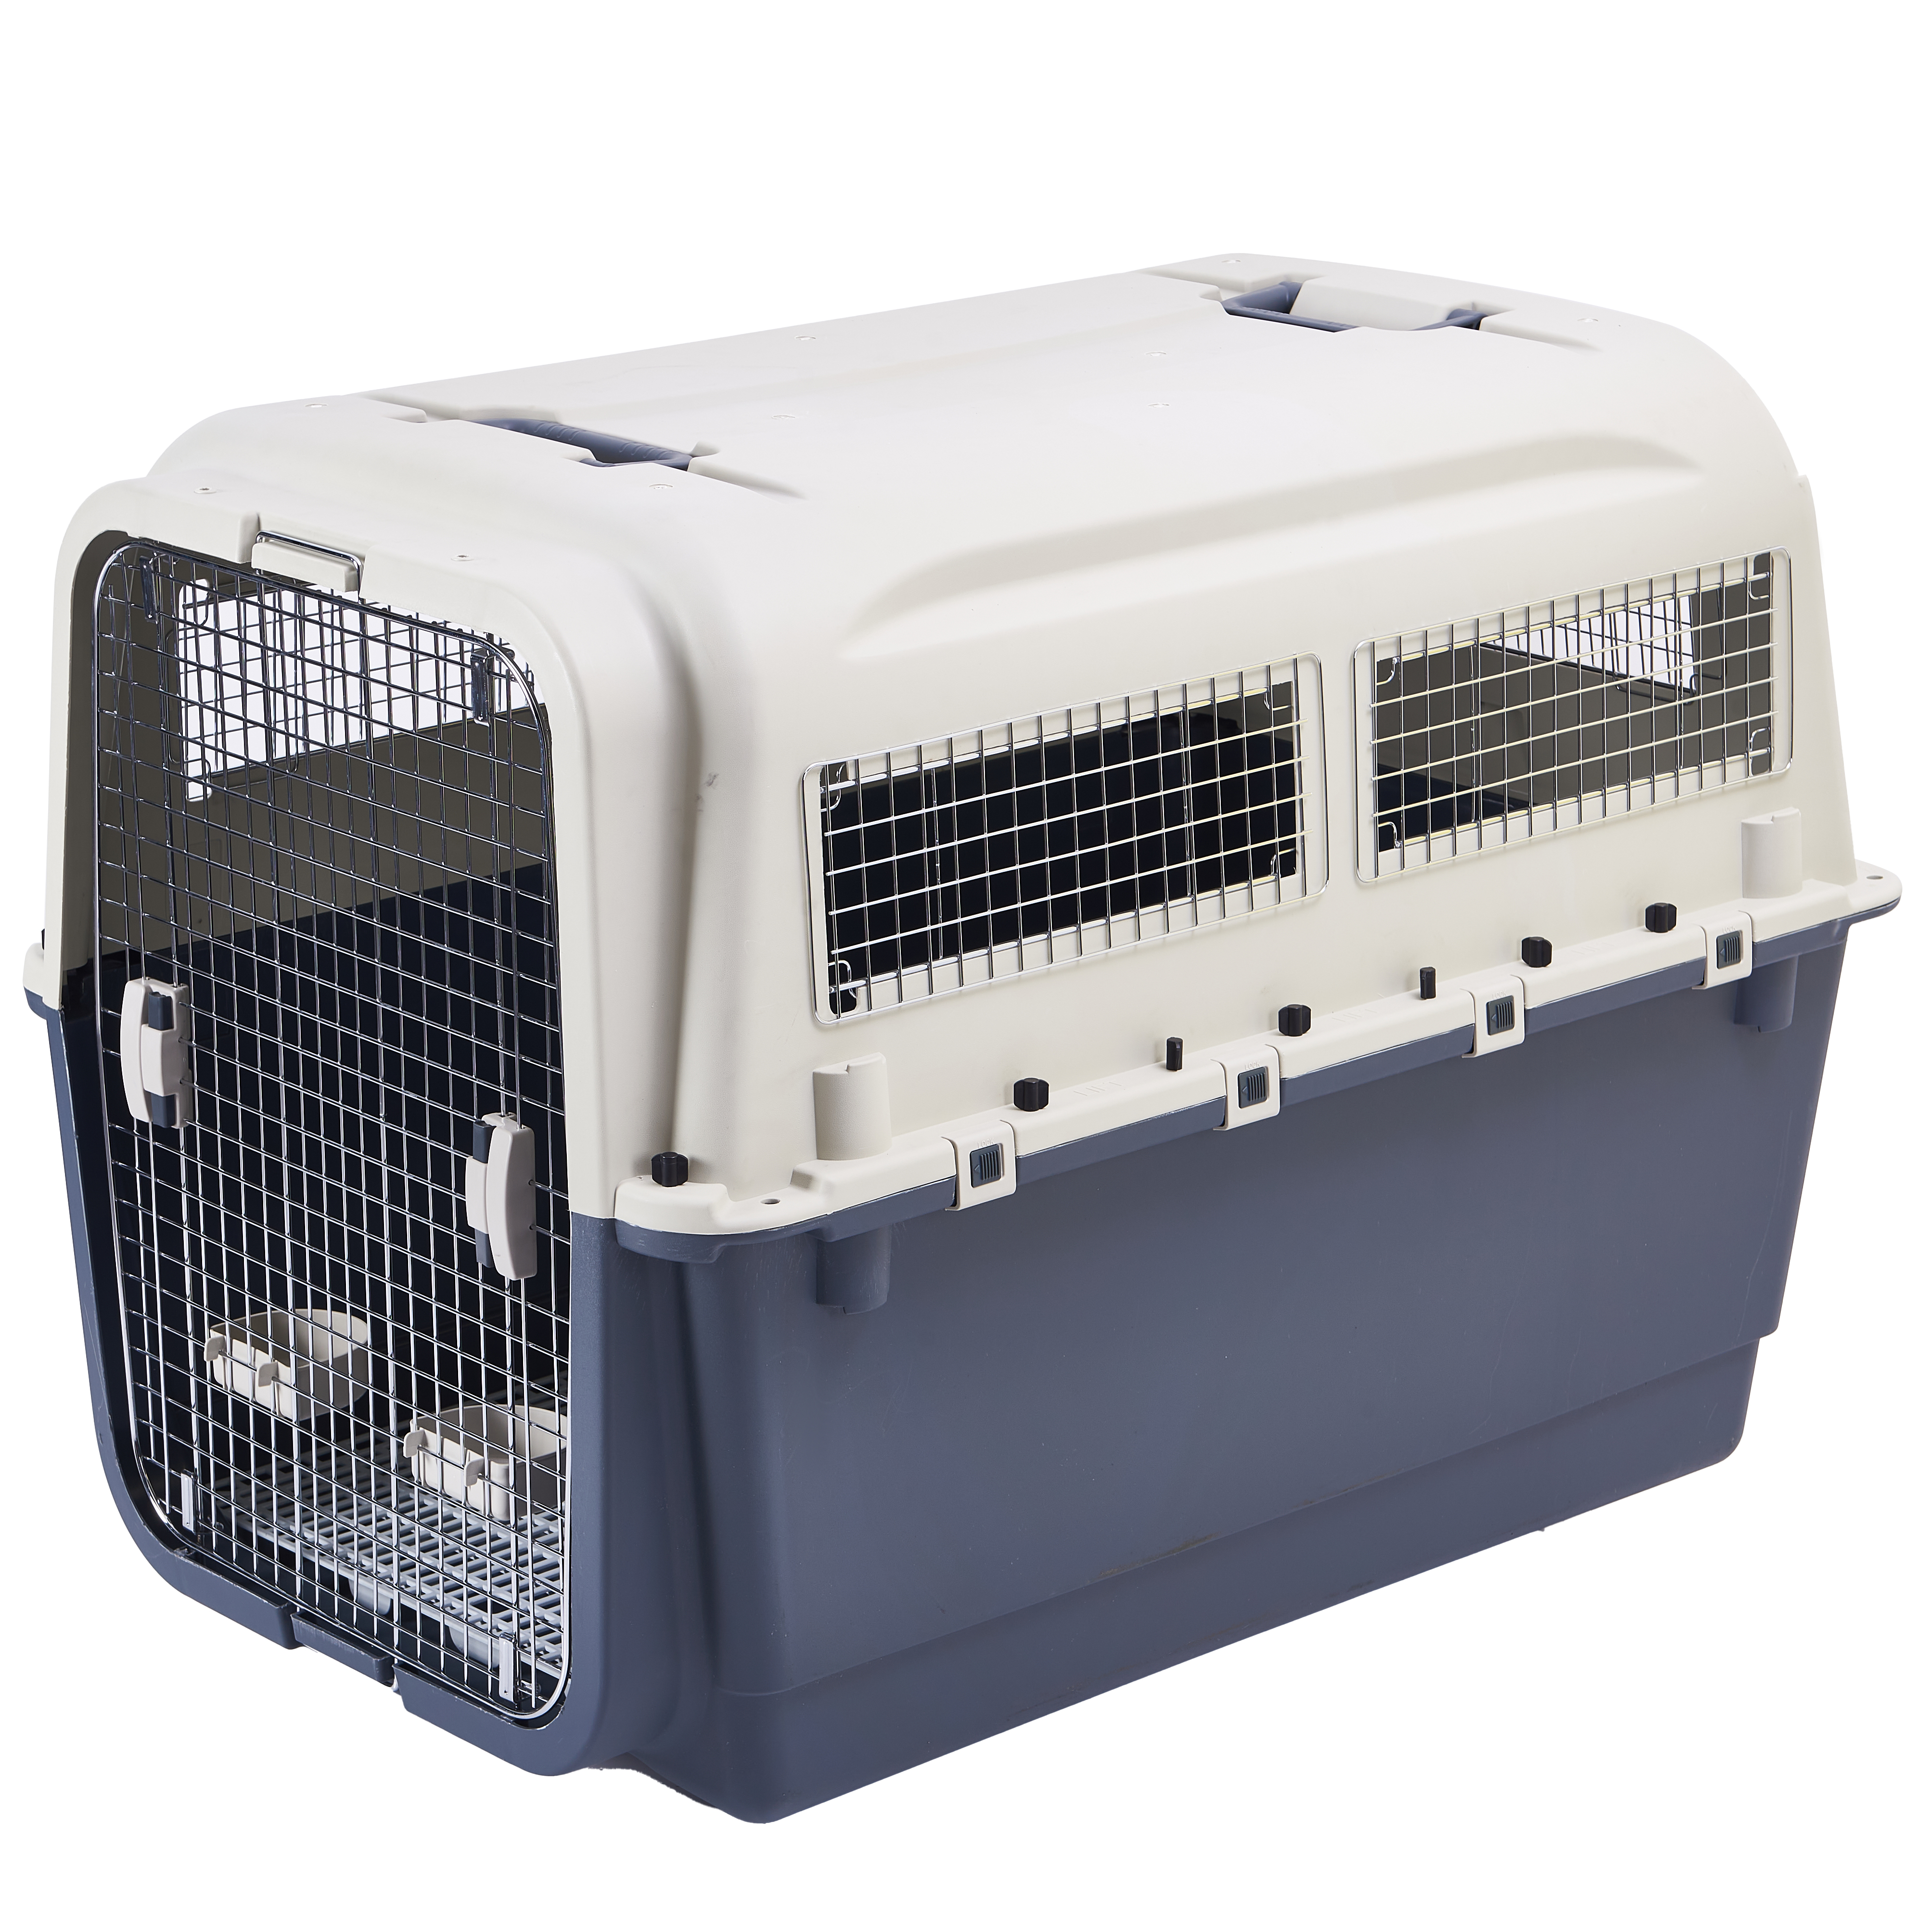 CB-PKC450 Basics 2-Door Top Load Hard-Sided Dog and Cat Kennel Travel Carrier